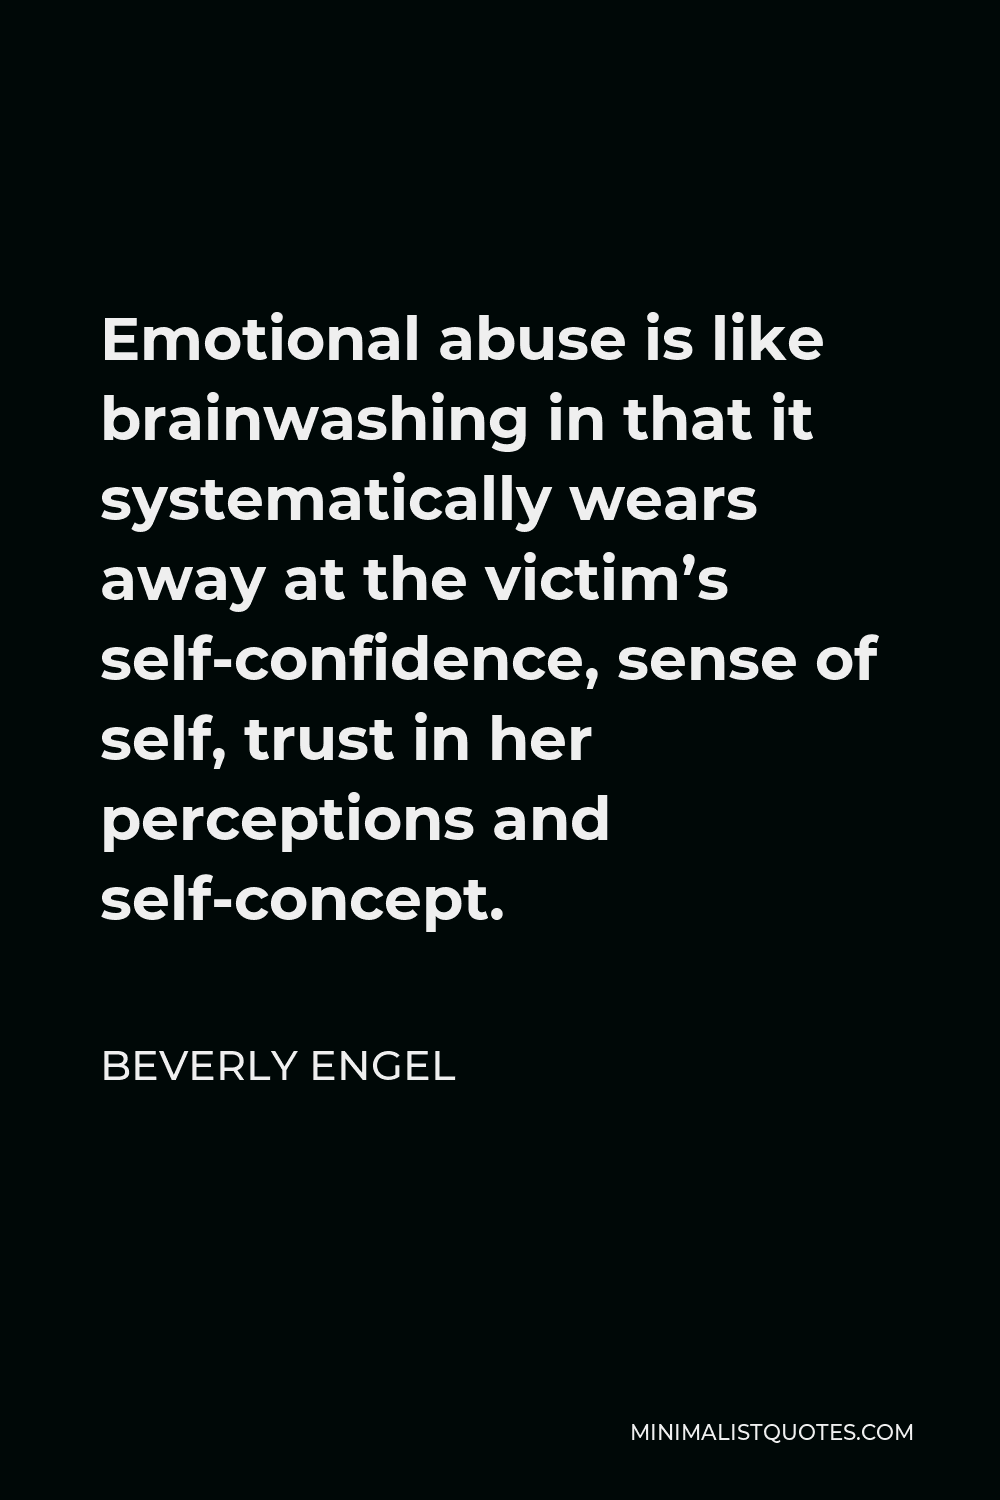 Beverly Engel Quote - Emotional abuse is like brainwashing in that it systematically wears away at the victim’s self-confidence, sense of self, trust in her perceptions and self-concept.